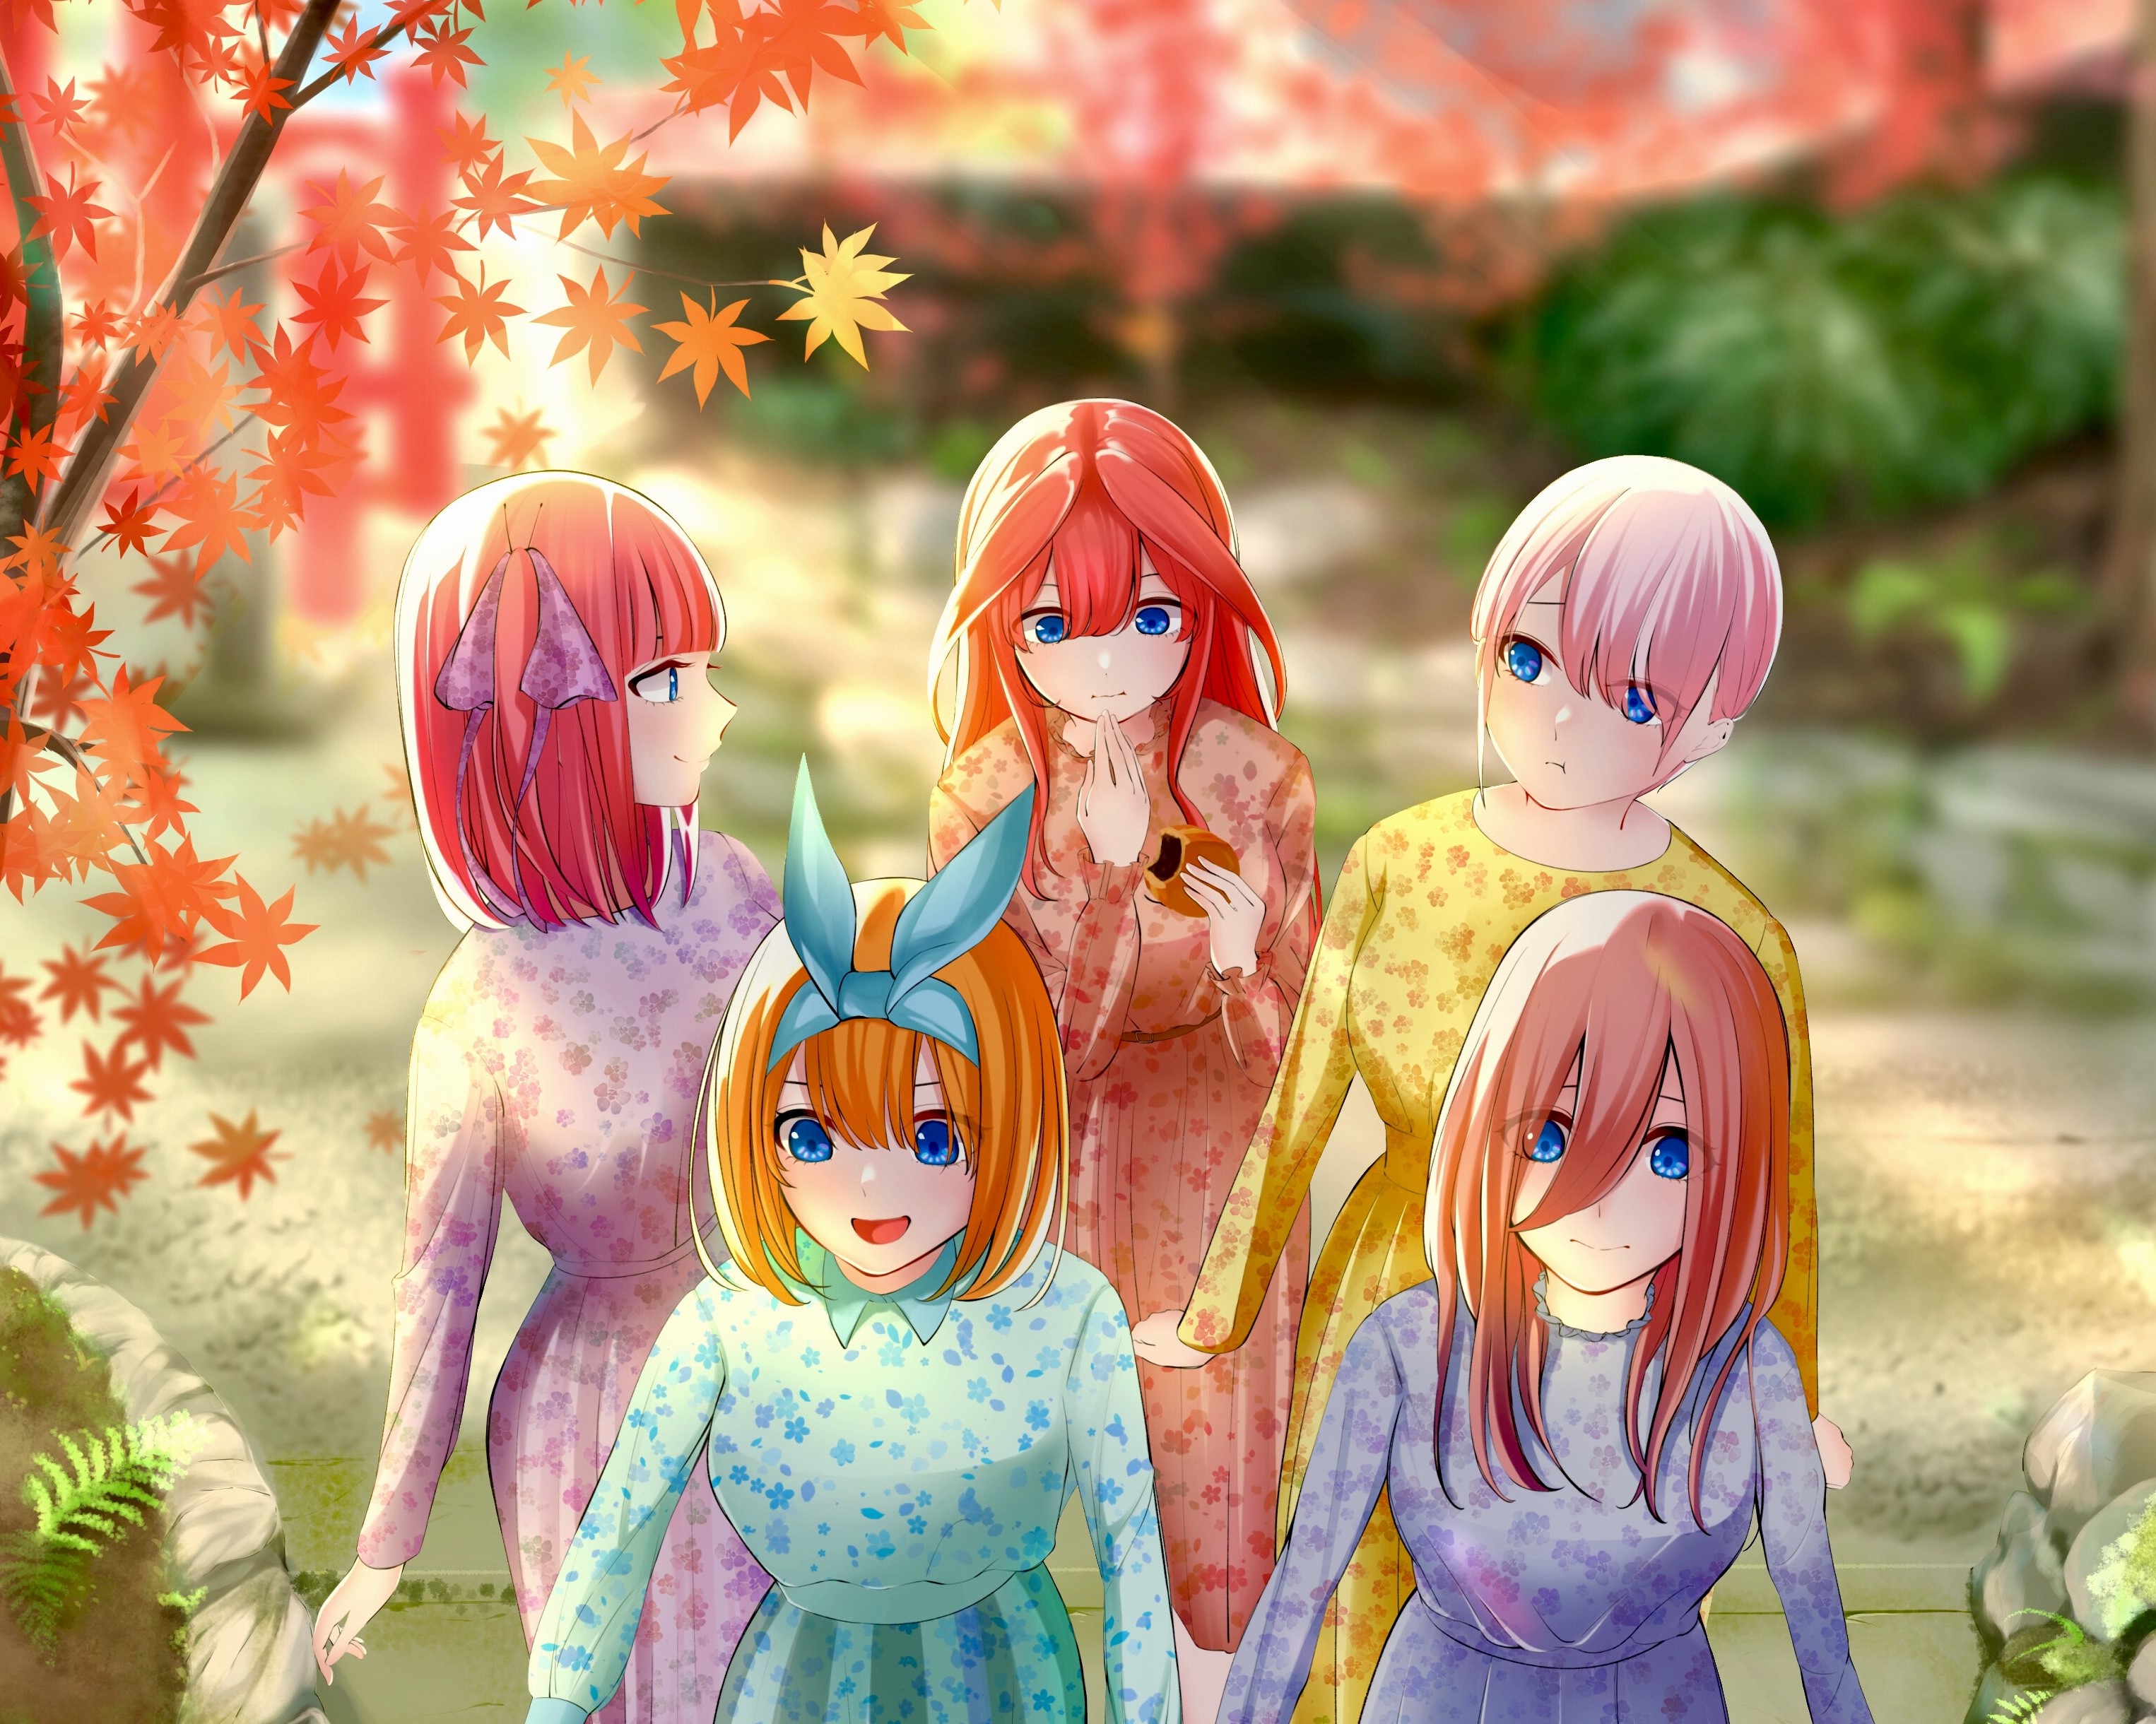 The Quintessential Quintuplets HD Wallpaper by りっぱう